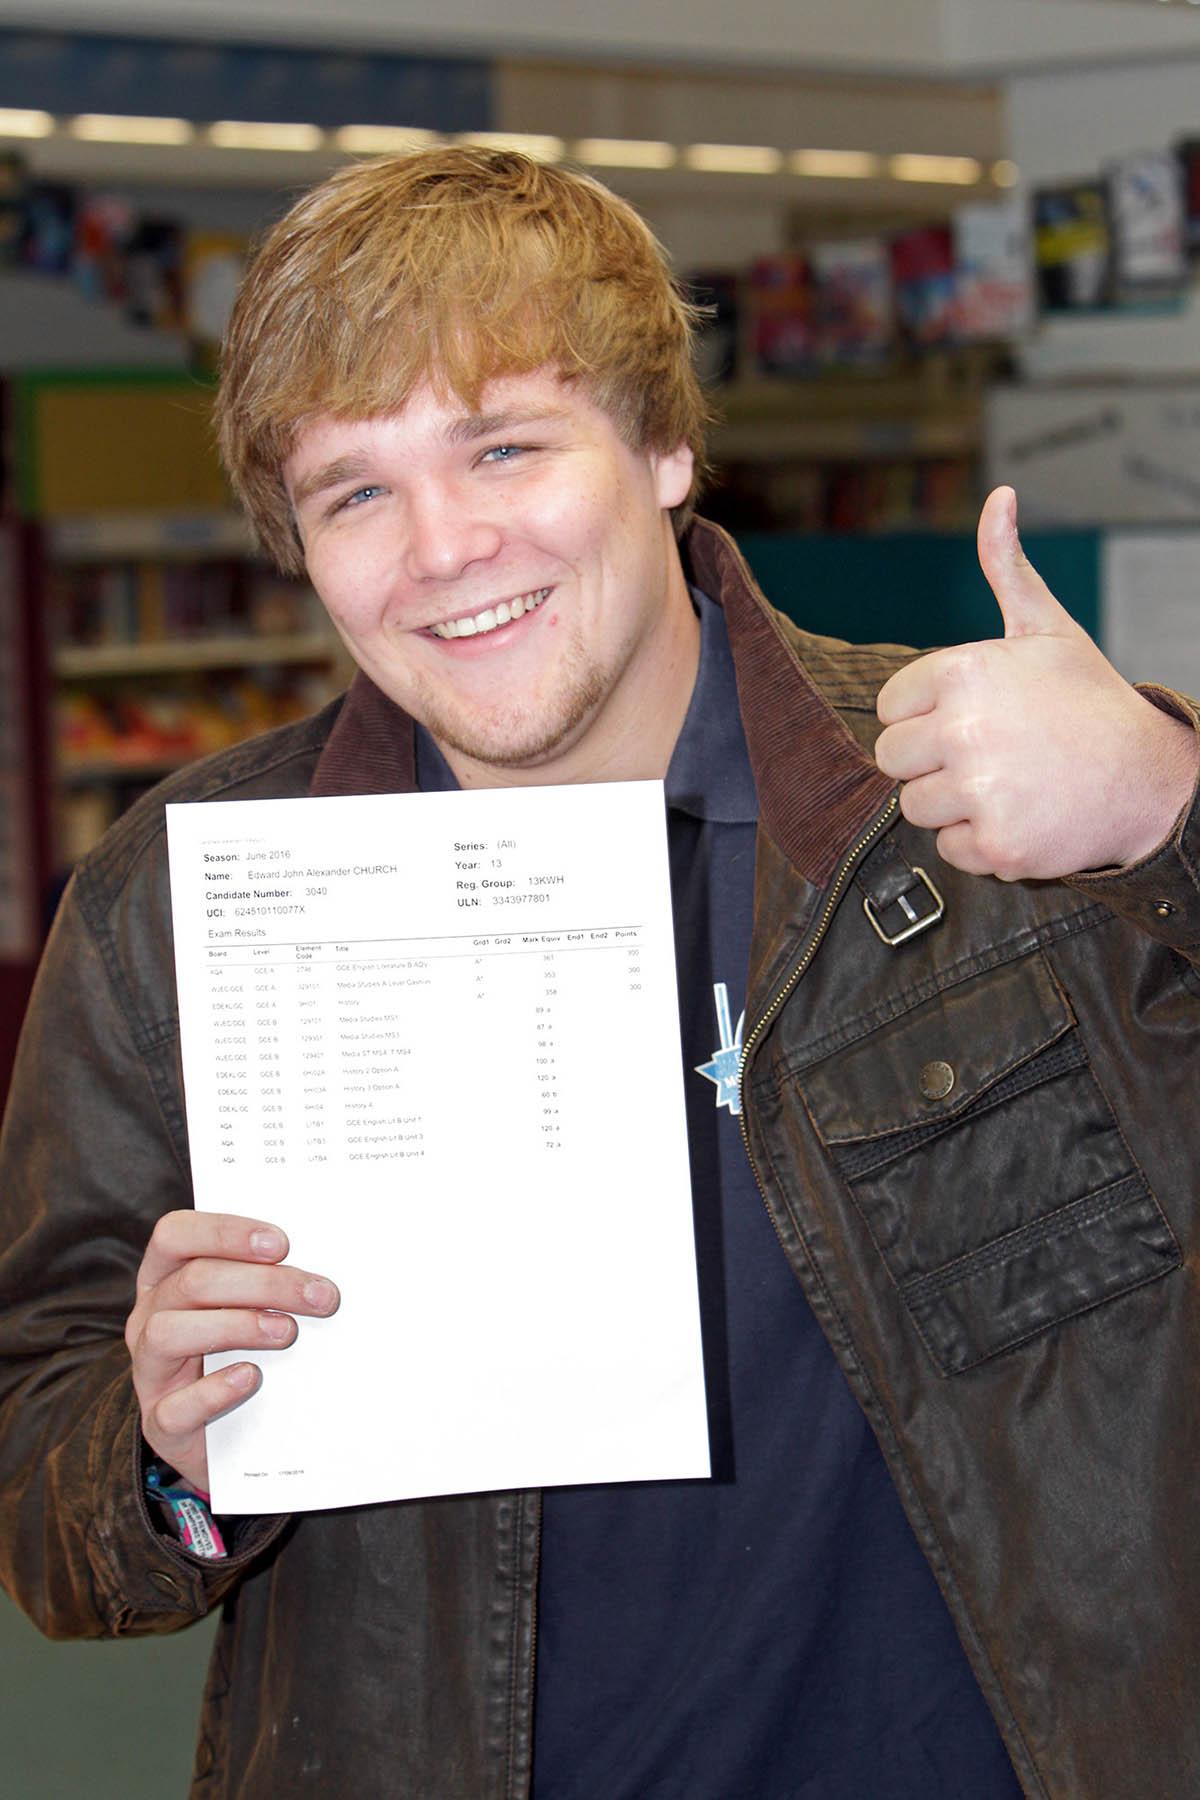 Pictures from around Oxfordshire of student receiving their A Level results, Wallingford School.